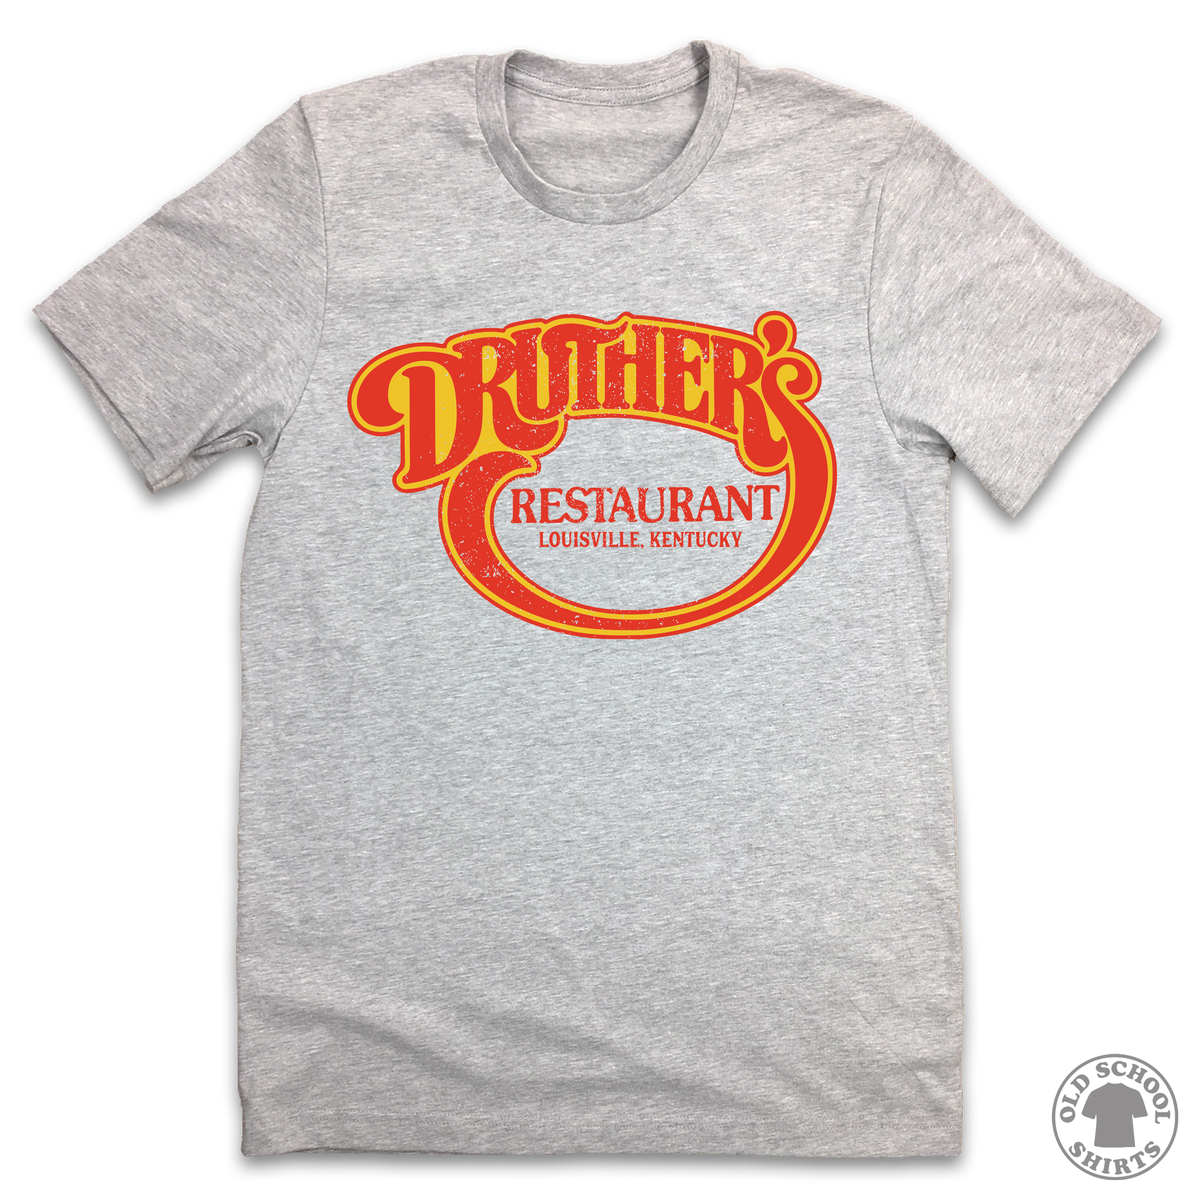 Druther's Restaurant - Old School Shirts- Retro Sports T Shirts